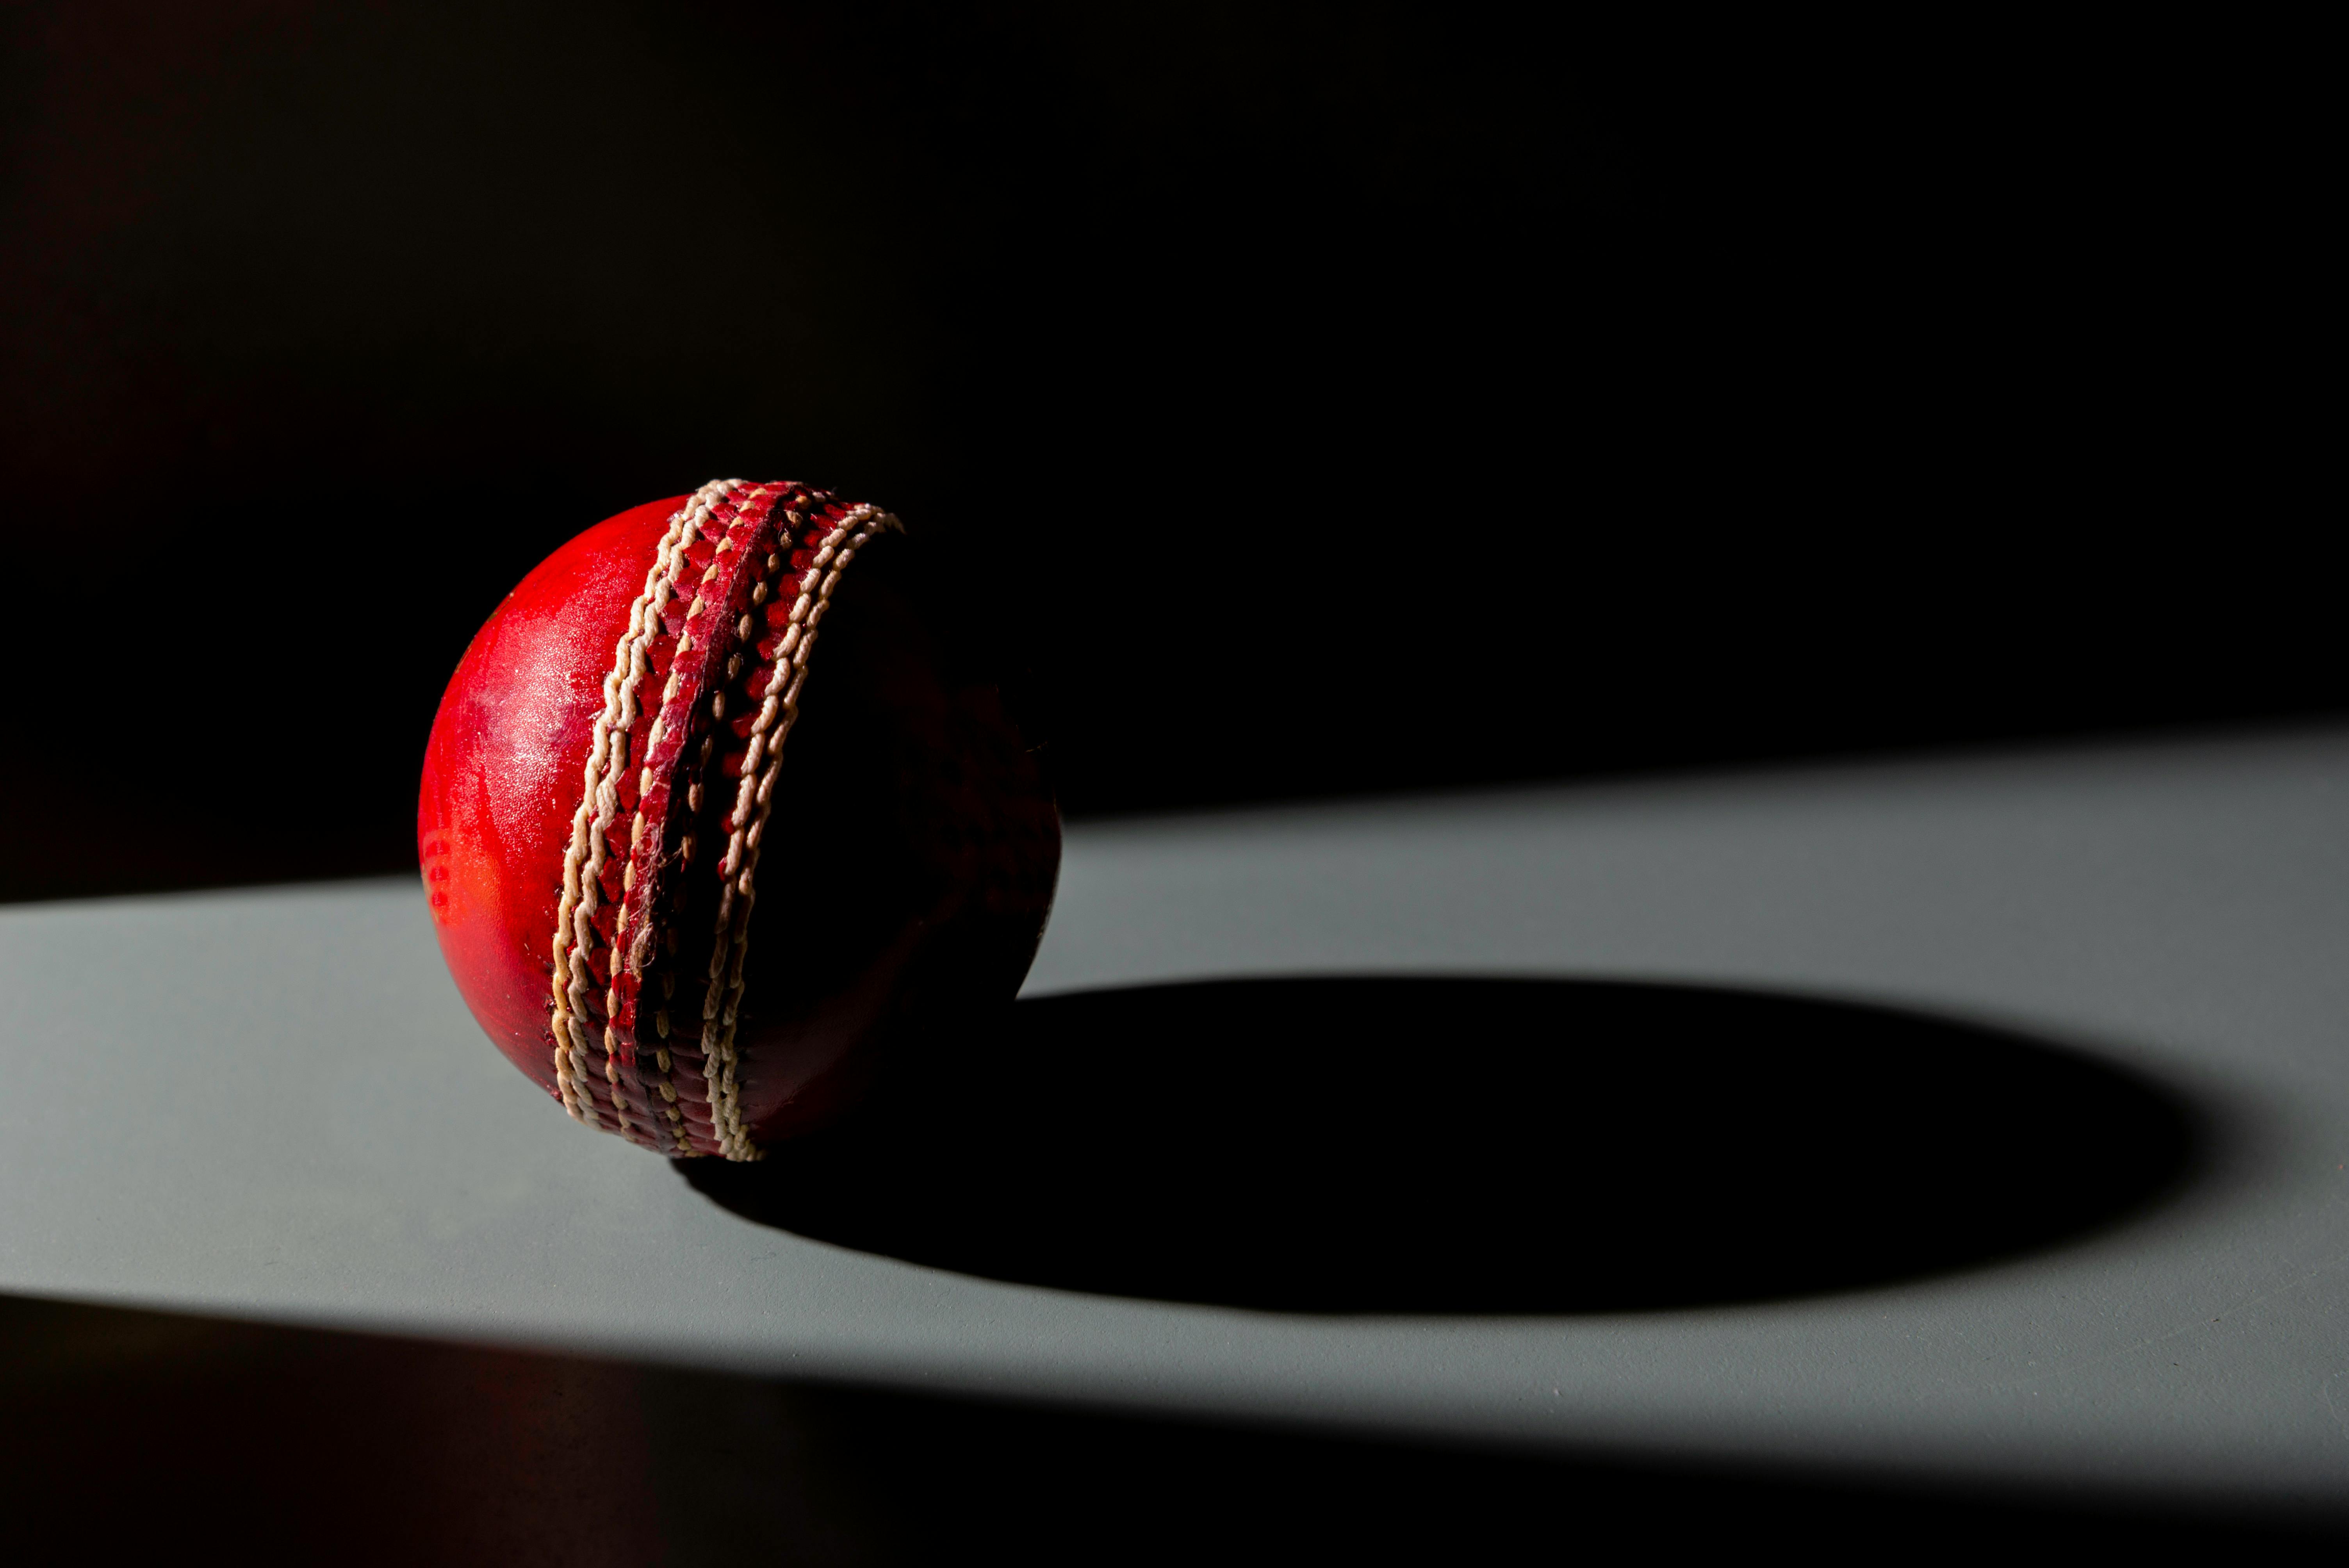 Cricket Background Stock Photos and Images - 123RF